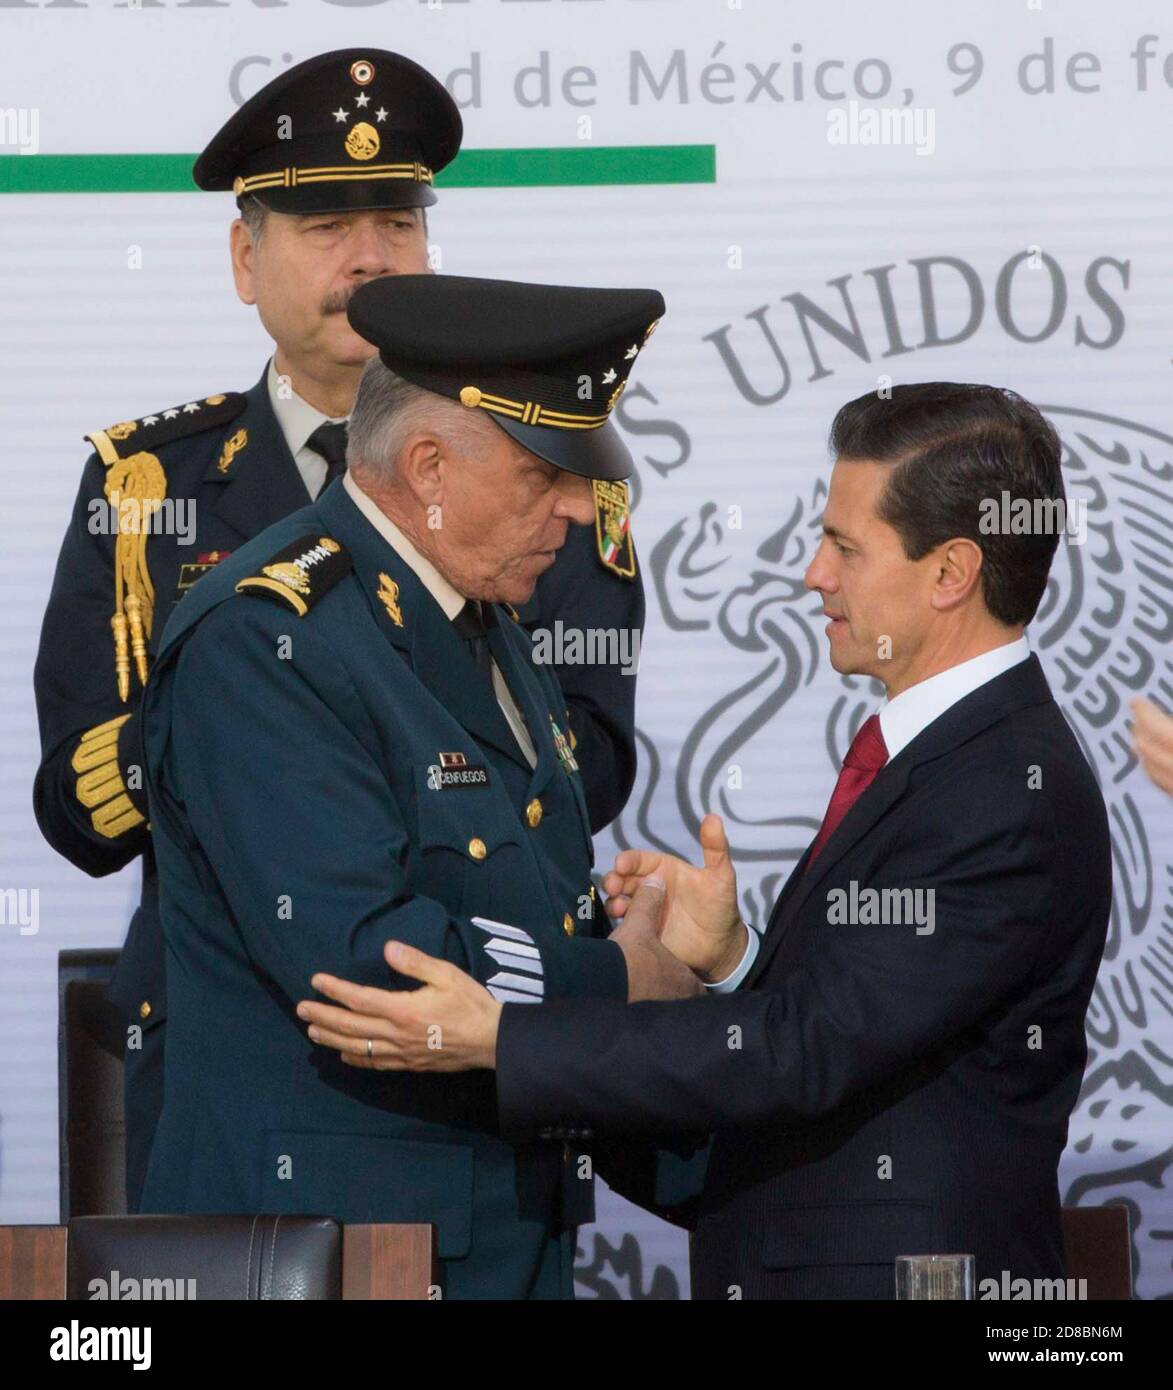 Mexican President Enrique Pena Nieto, right, embraces Defense Minister Gen. Salvador Cienfuegos Zepeda during a ceremony marking the 104th Anniversary of the Loyalty March February 9, 2017 in Mexico City, Mexico. Cienfuegos was arrested October 16, 2020 at Los Angeles International Airport and charged with drug-related corruption. Stock Photo